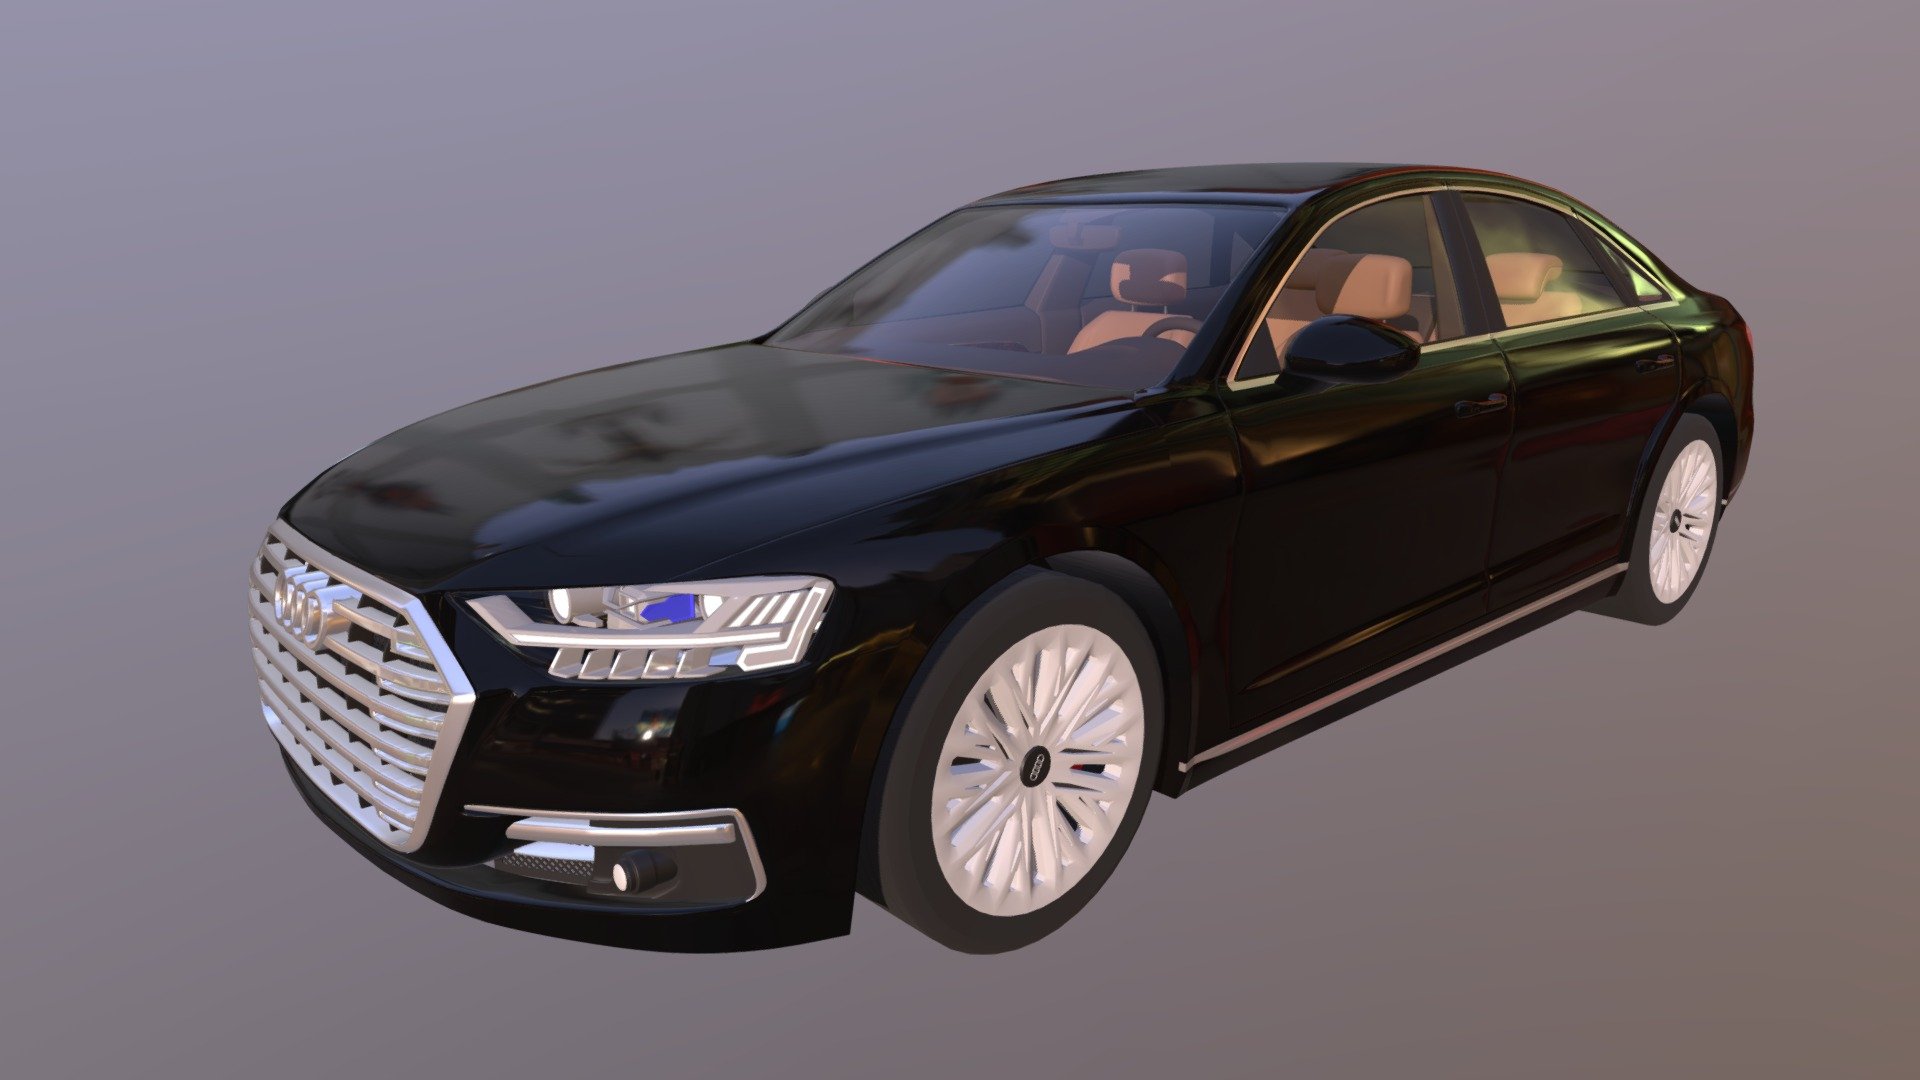 Audi A8 2019 Standard Wheel Base

The Audi A8 is a four-door, full-size, luxury sedan manufactured and marketed by the German automaker Audi. The design of the 2019 A8 and A8L was based on the Audi Prologue concept.

Software: Autodesk® Maya® 2018 - Audi A8 2019 Standard Wheel Base - 3D model by Montblanc 3d model